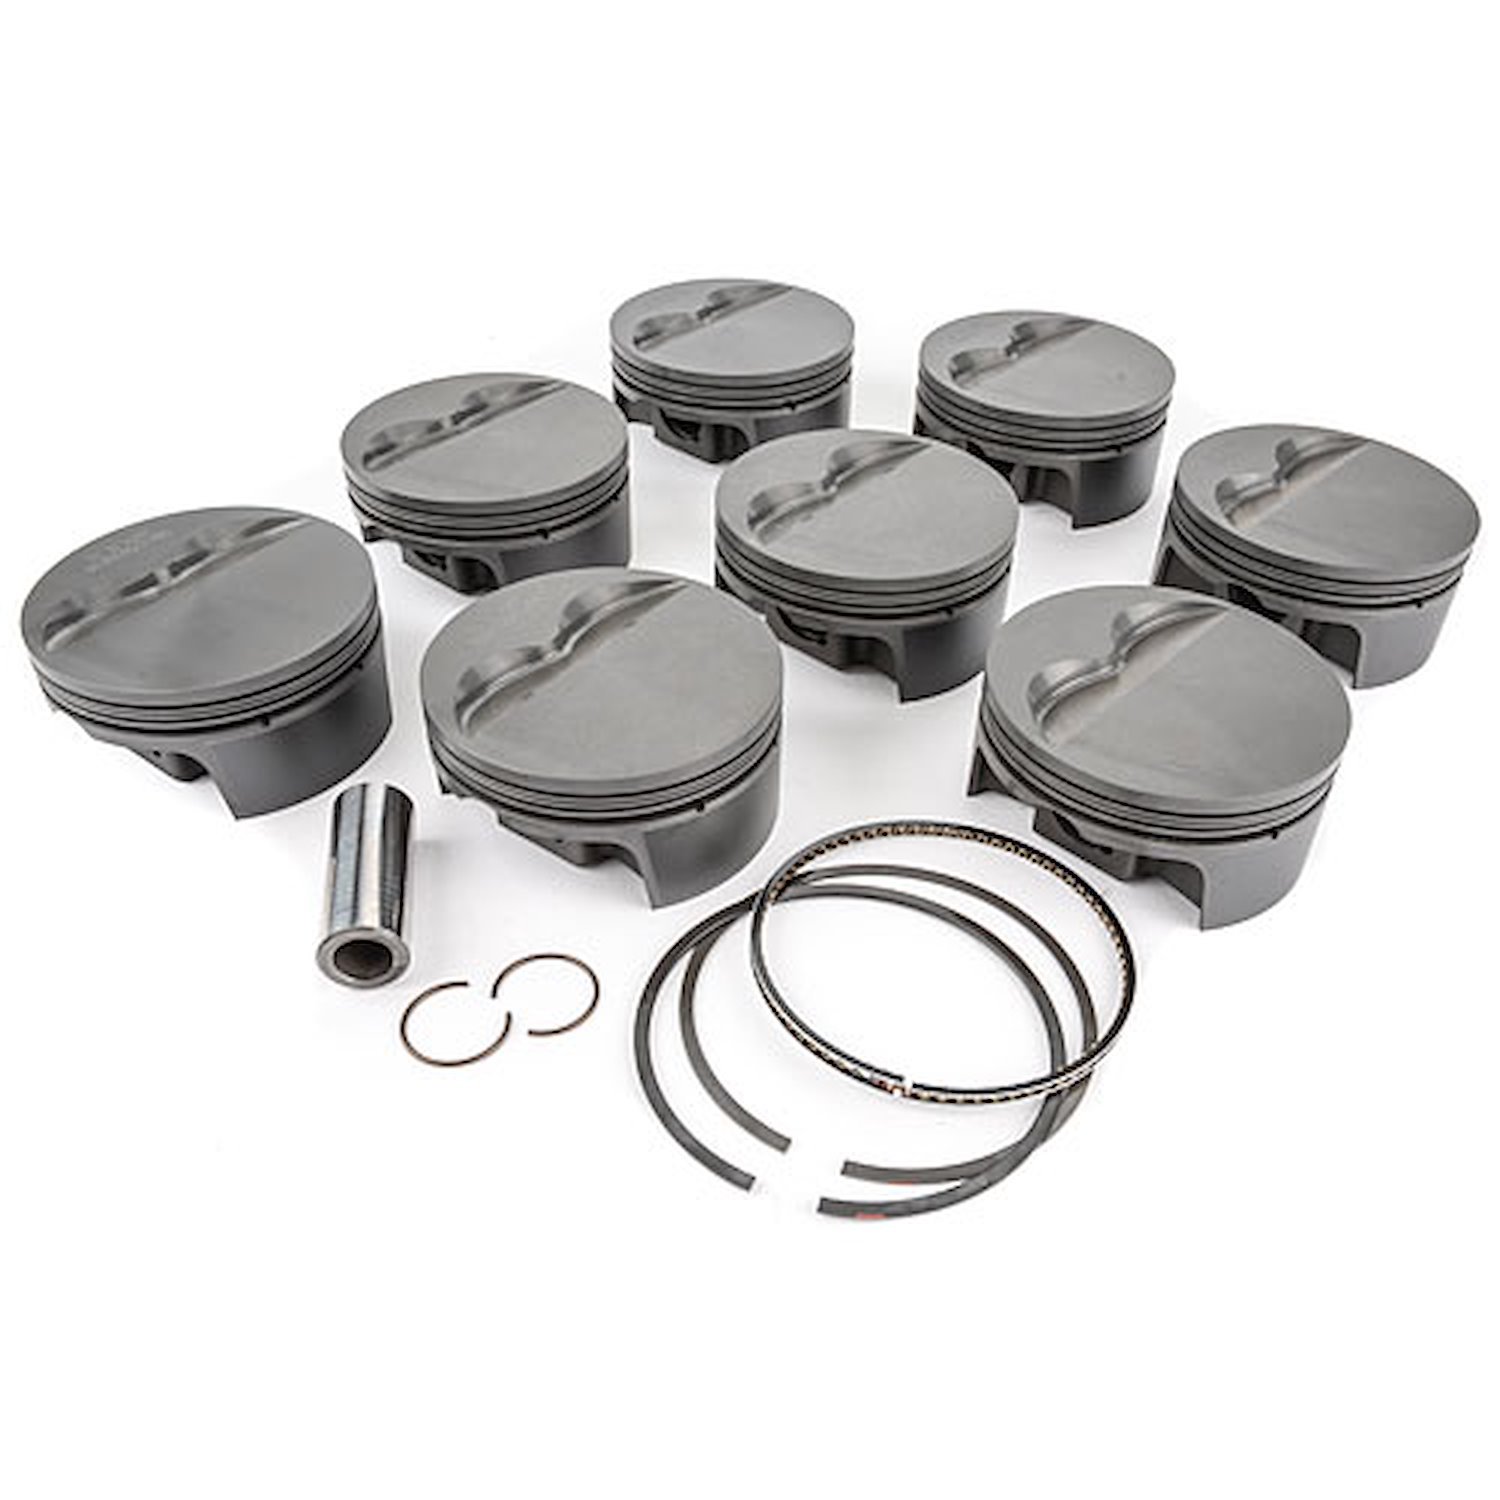 Hemi 6.1L PowerPak Piston & Ring Kit Forged 4032 High Silicon Low Expansion Aluminum Alloy